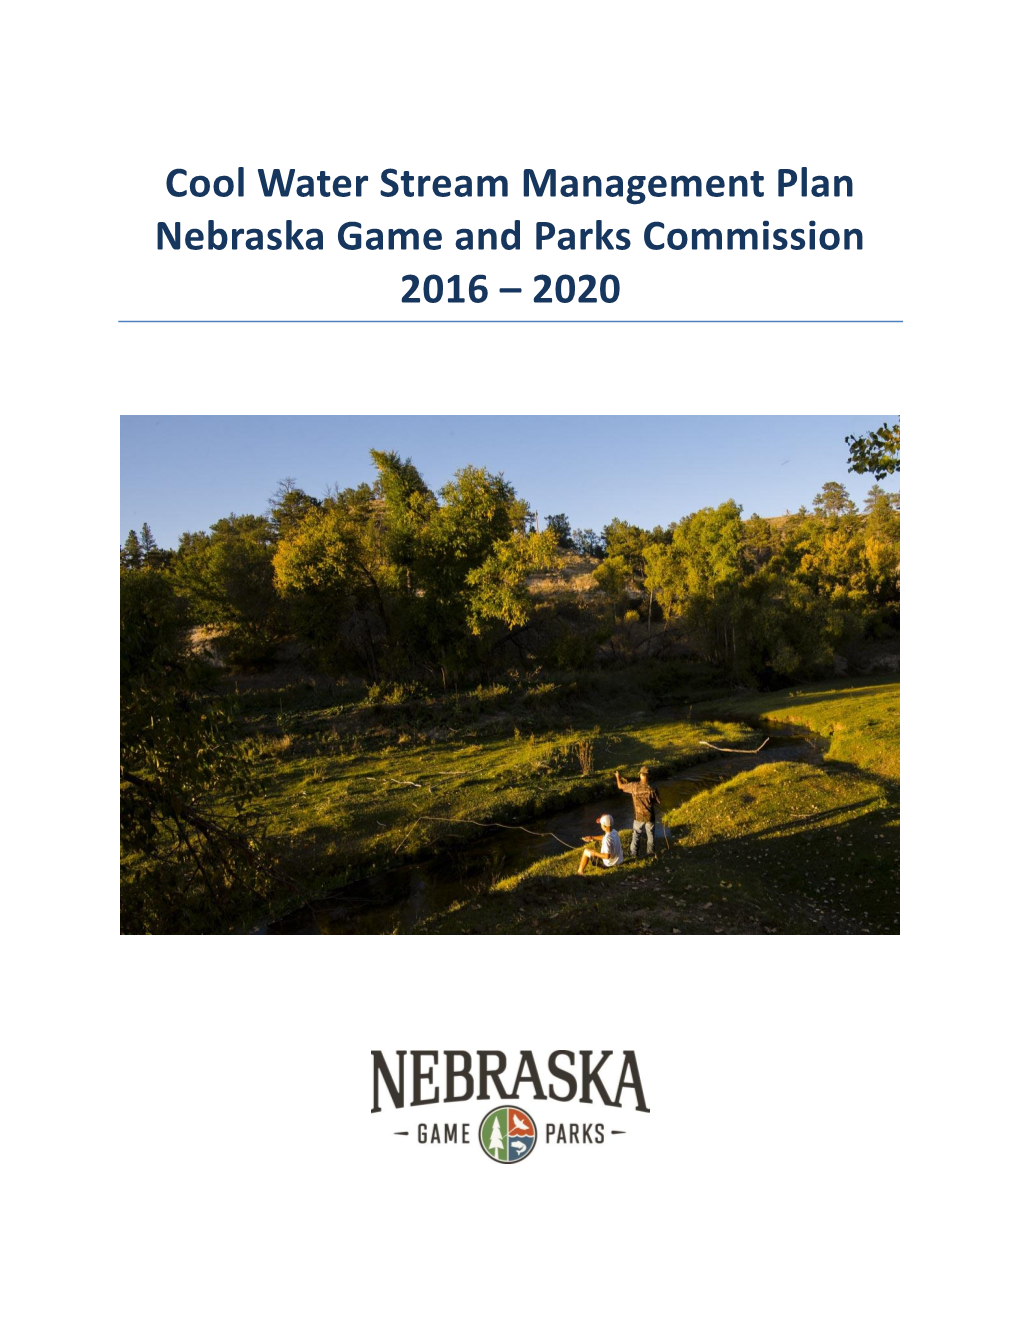 Cool Water Stream Management Plan Nebraska Game and Parks Commission 2016 – 2020